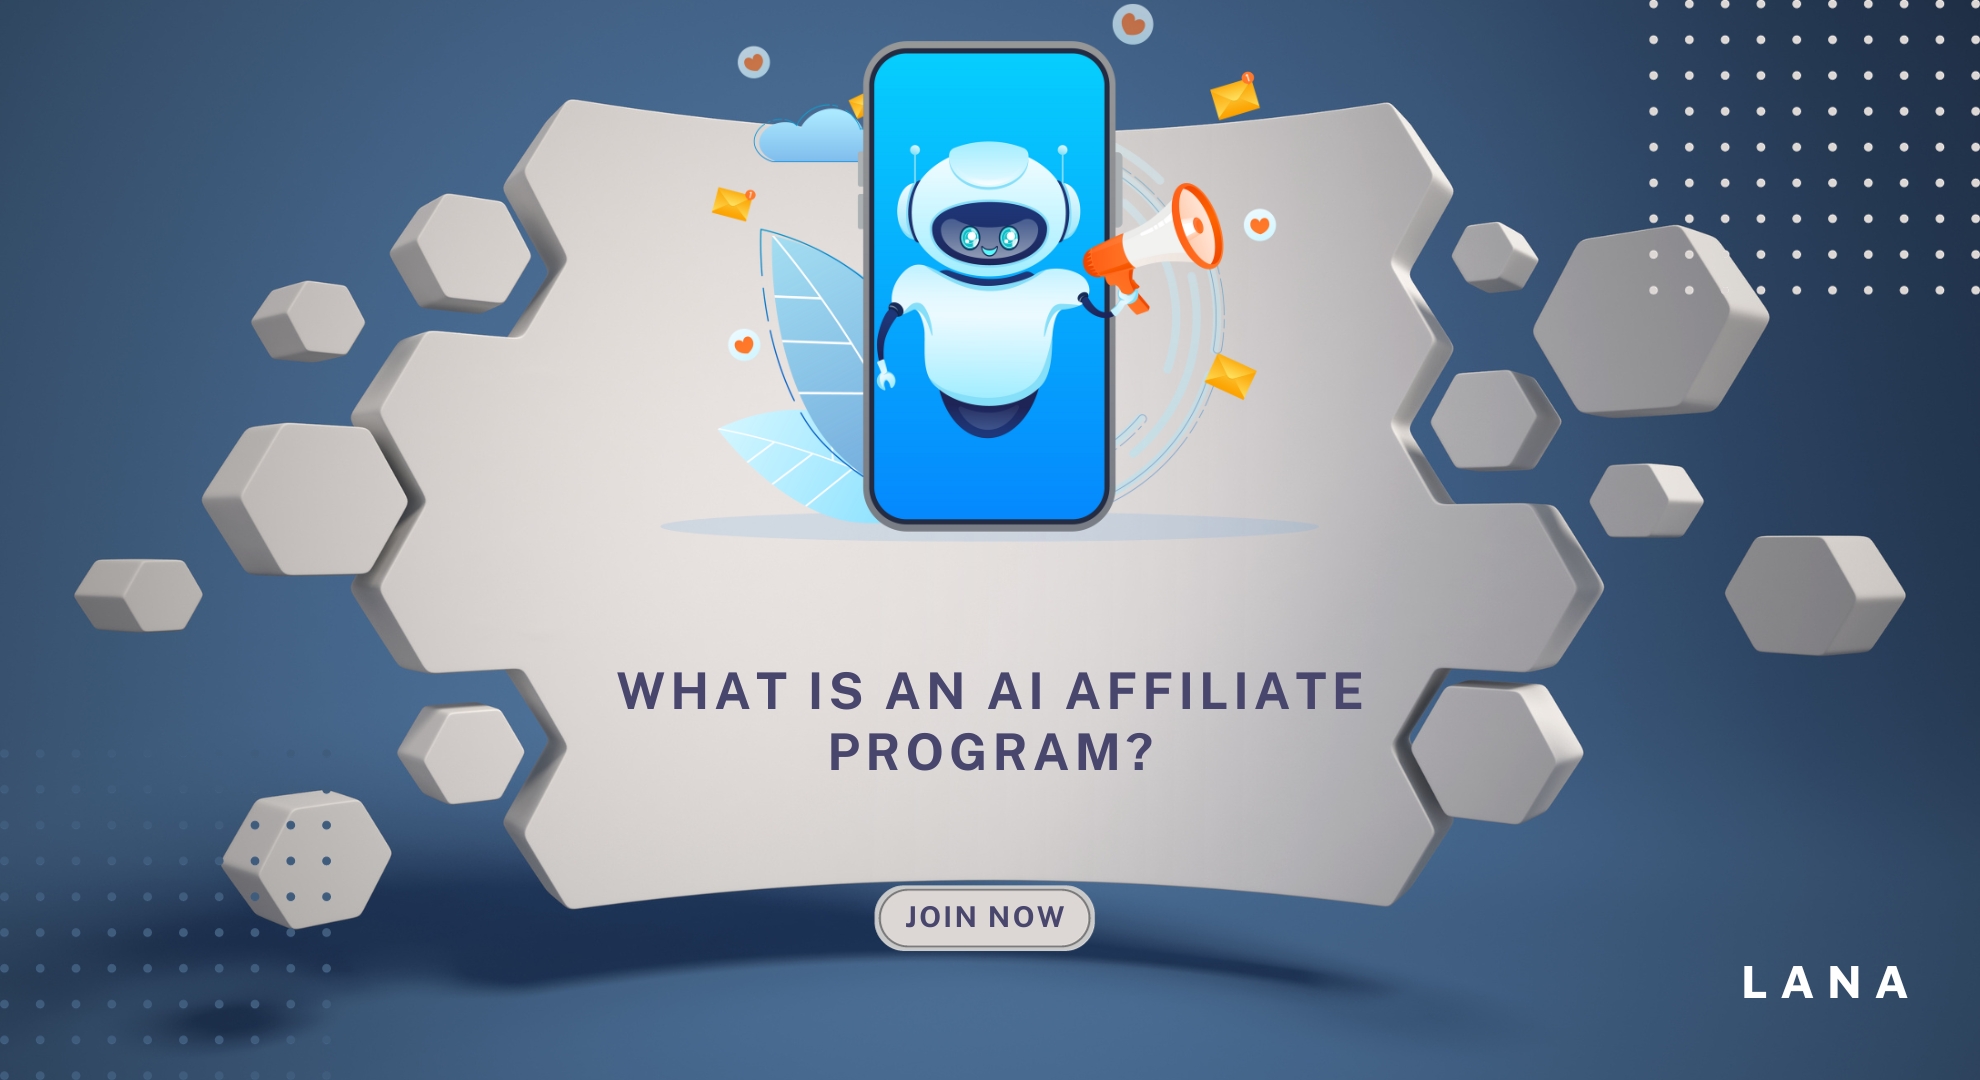 What is an AI Affiliate Program